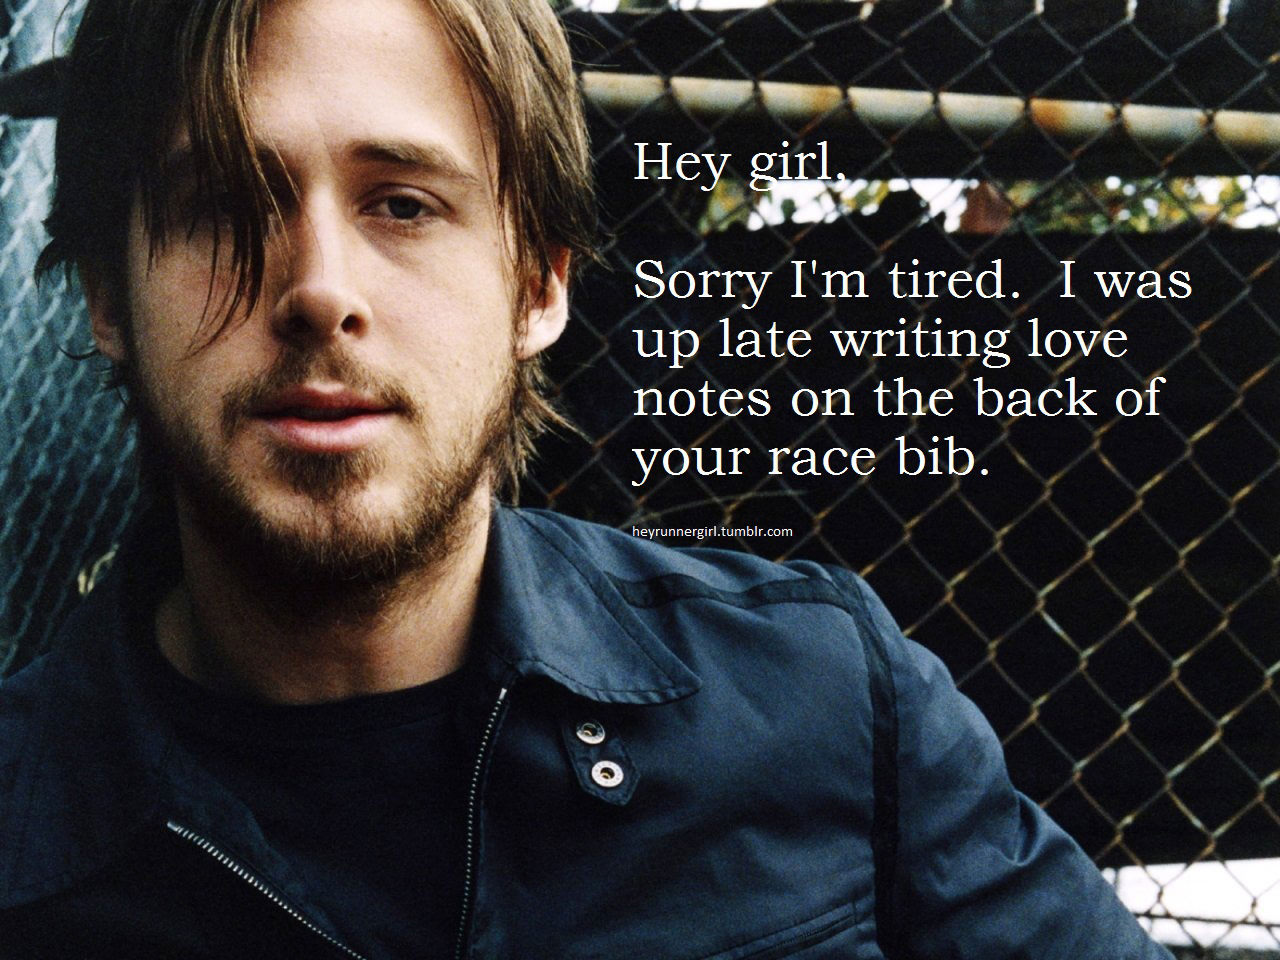 Runner Things #741: Hey girl, sorry I'm tired. I was up late writing love notes on the back of your race bib.